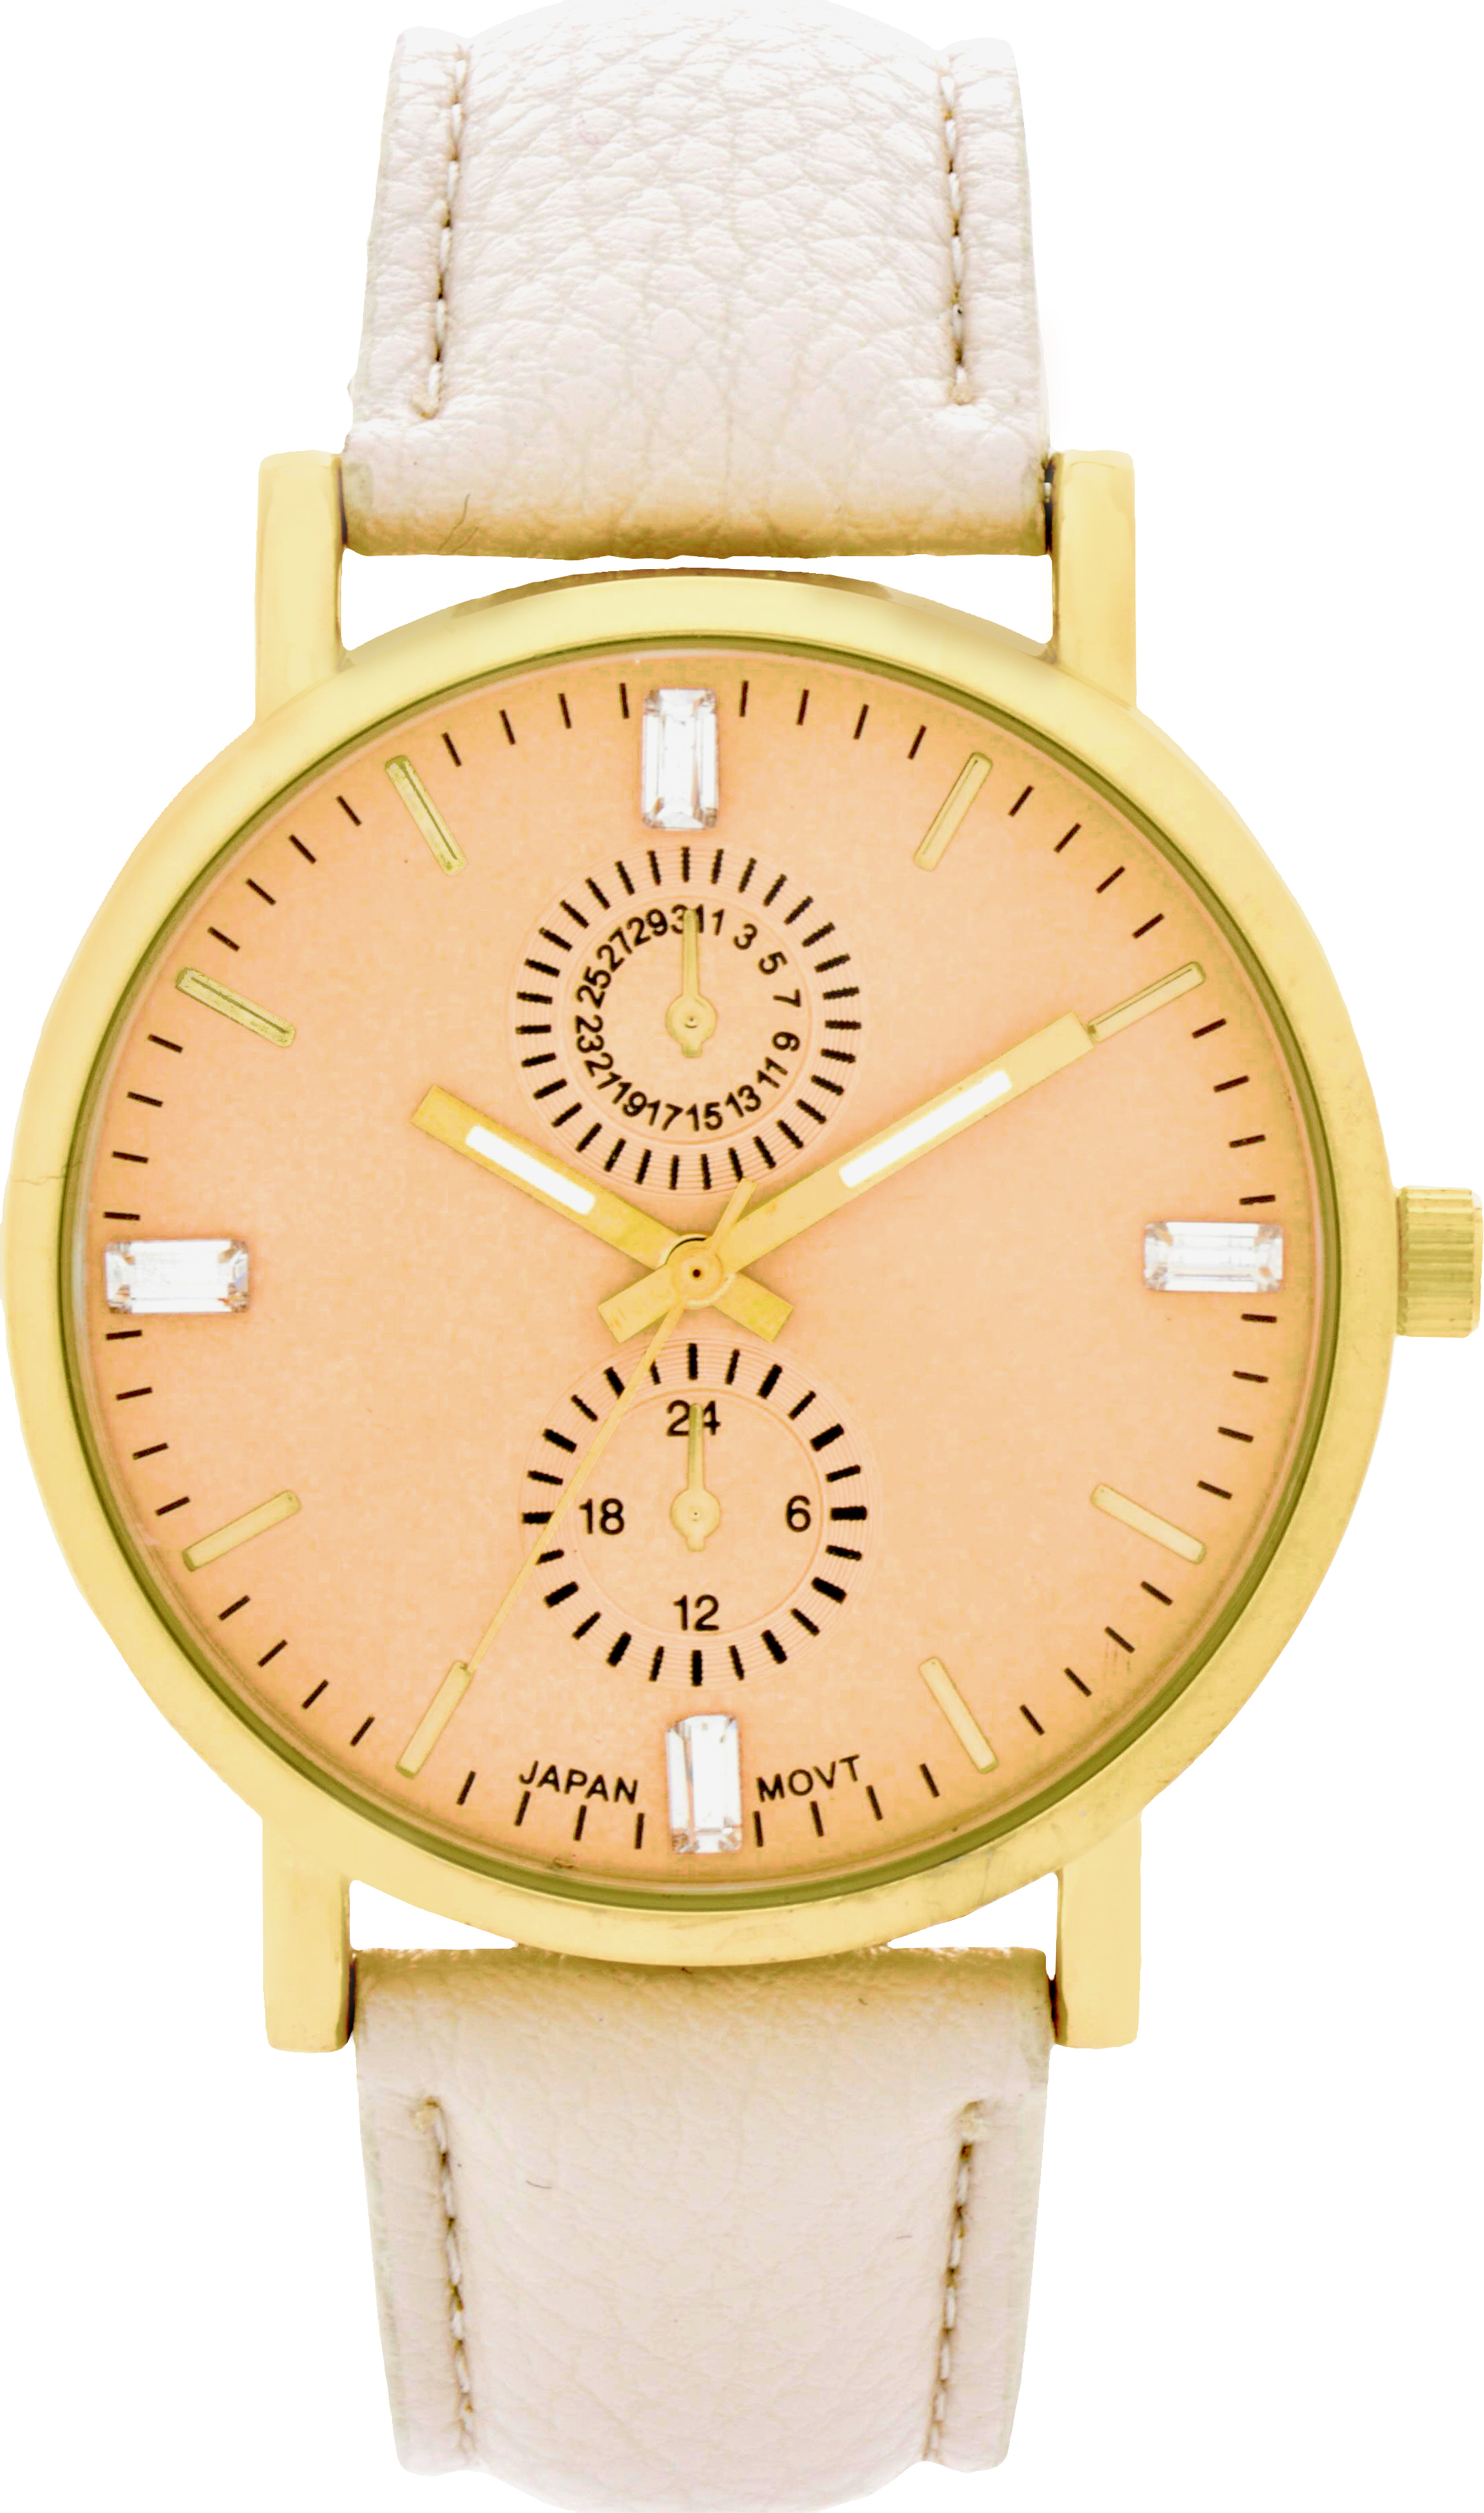 CHEAP Everyday Great Price Watches Ladies Watch, Women's OFFER